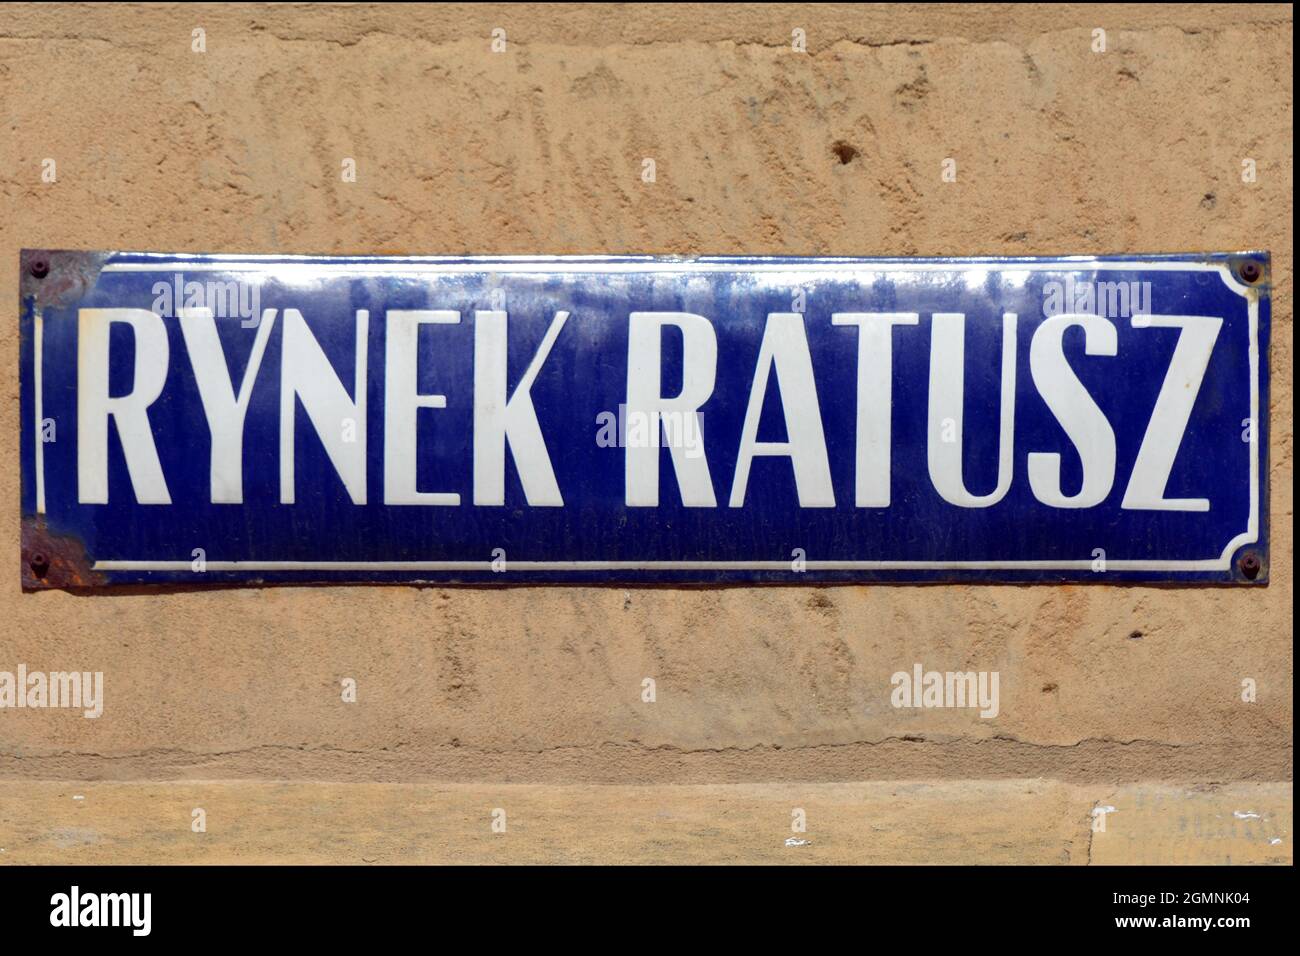 Street sign of Rynek Ratusz in the Old Town of Wroclaw - Poland. Stock Photo